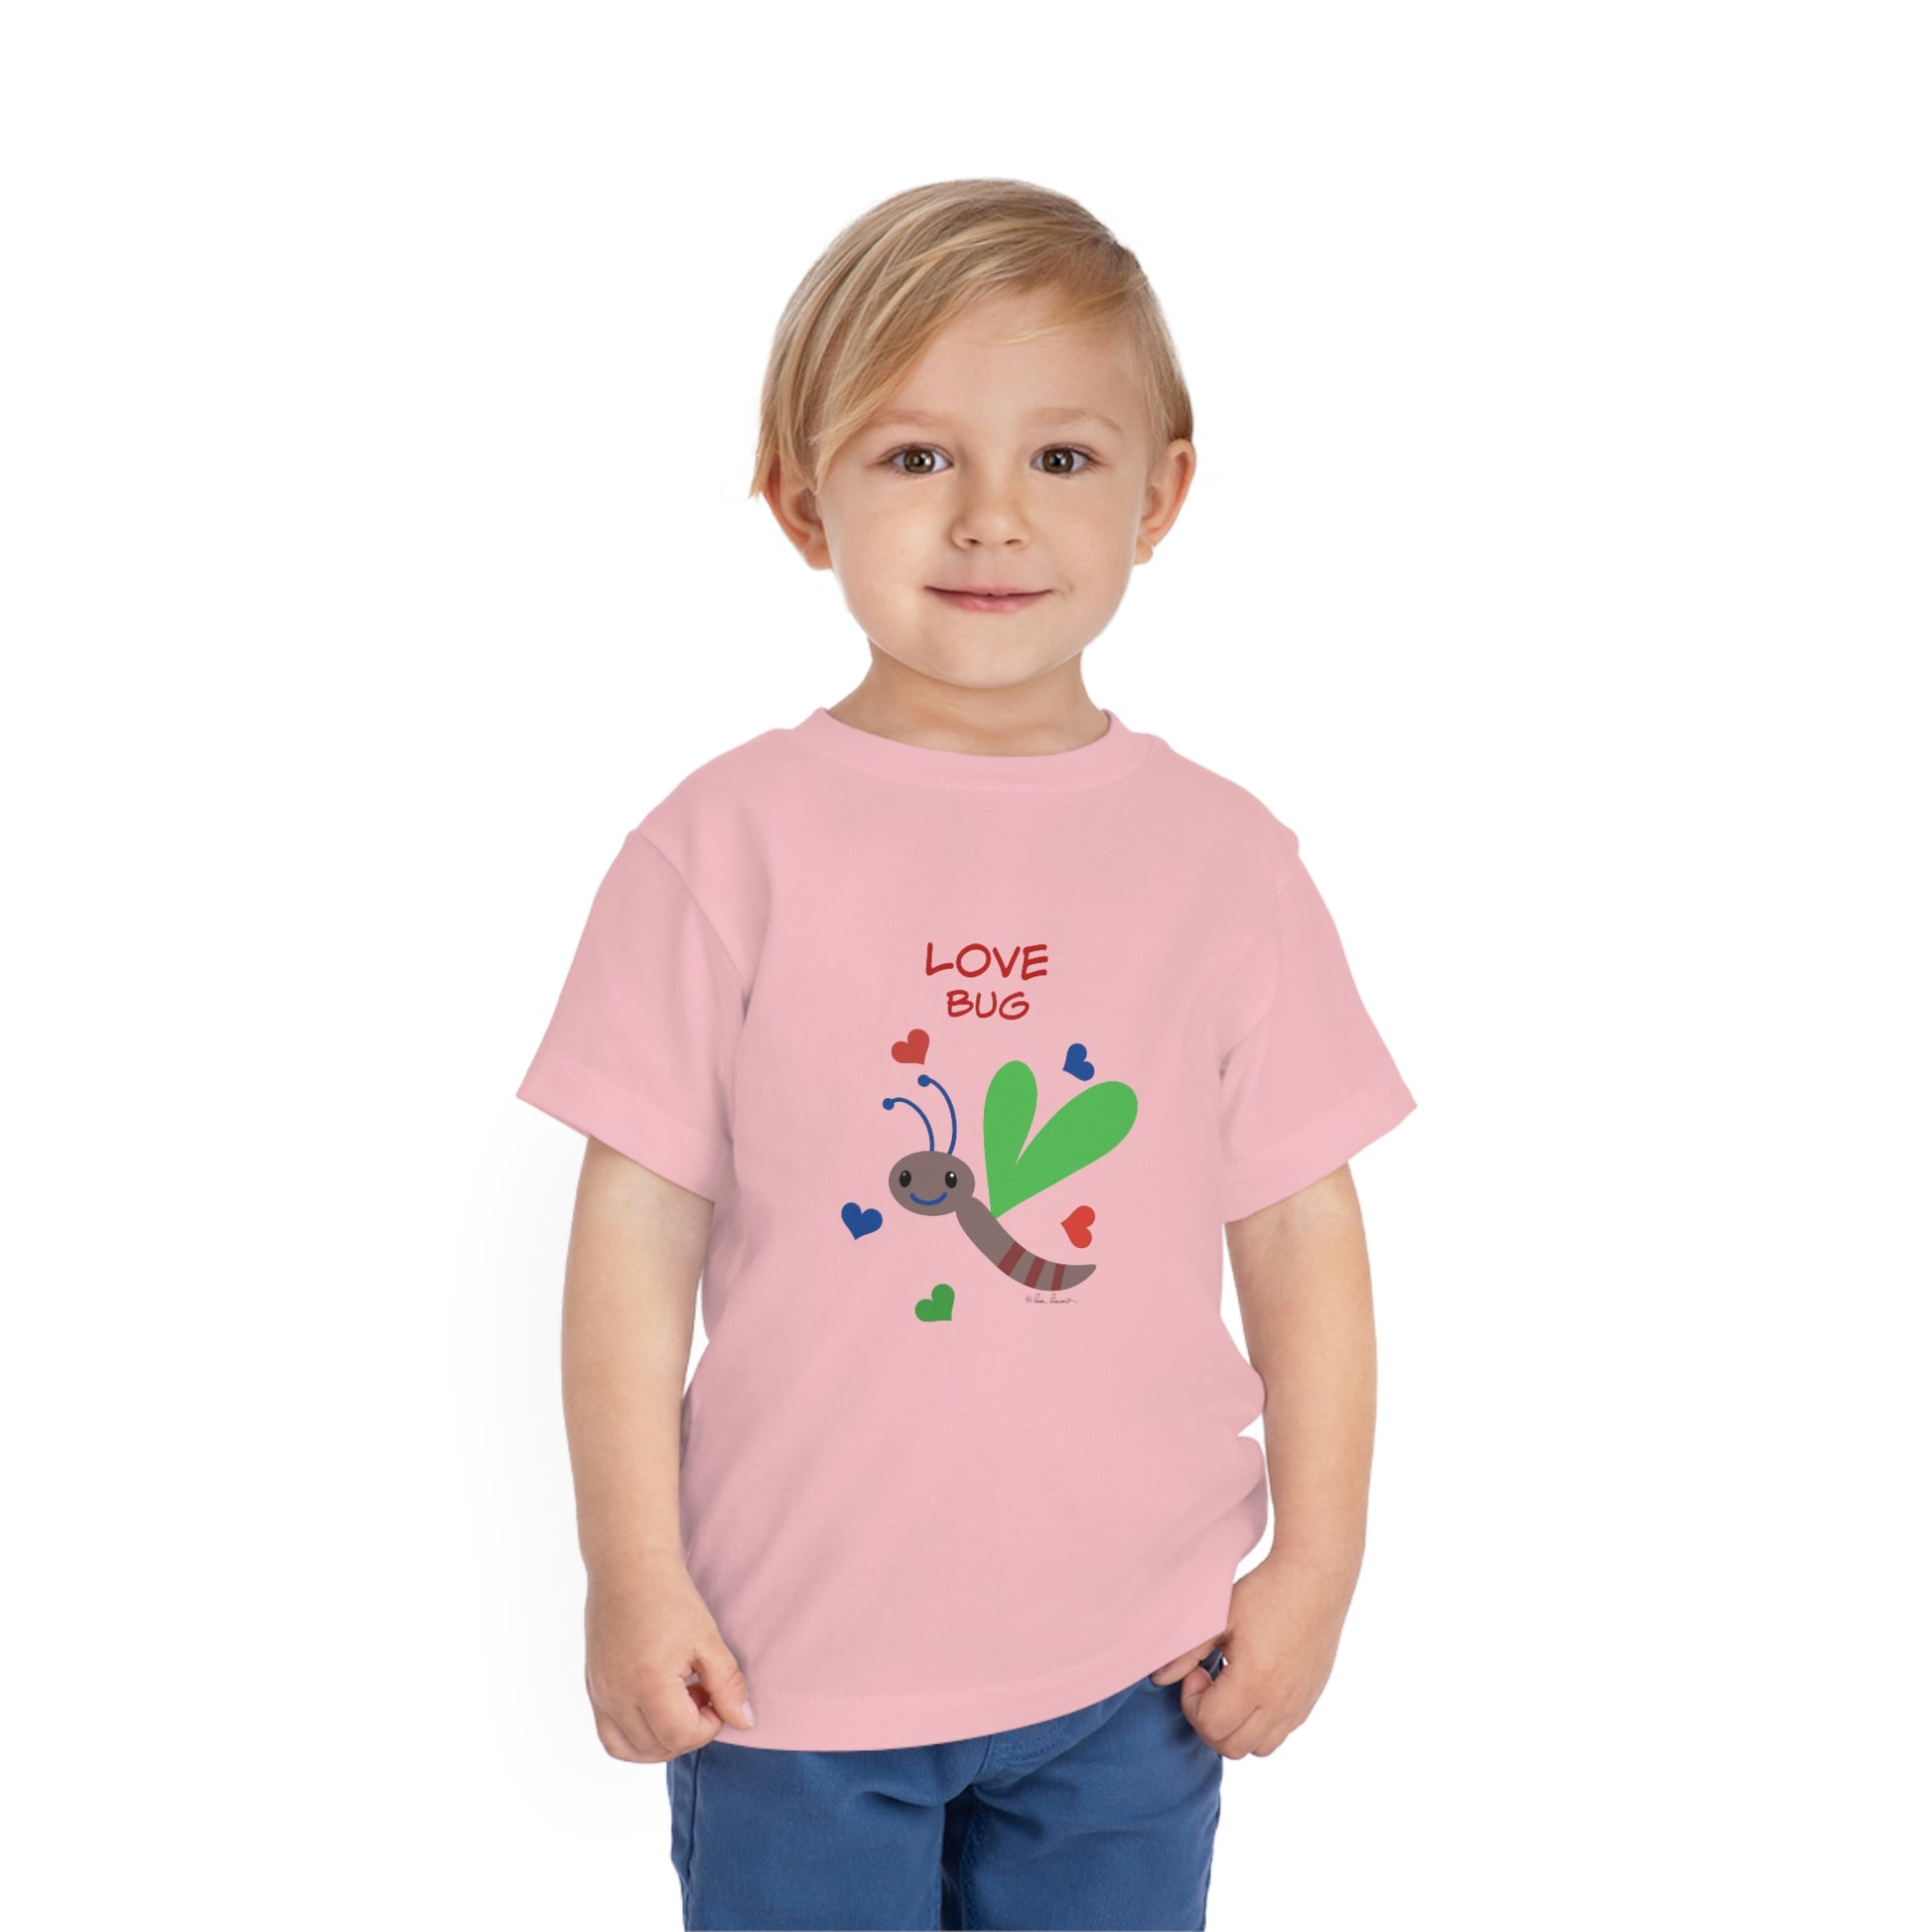 Mock up of a child wearing our Pink t-shirt